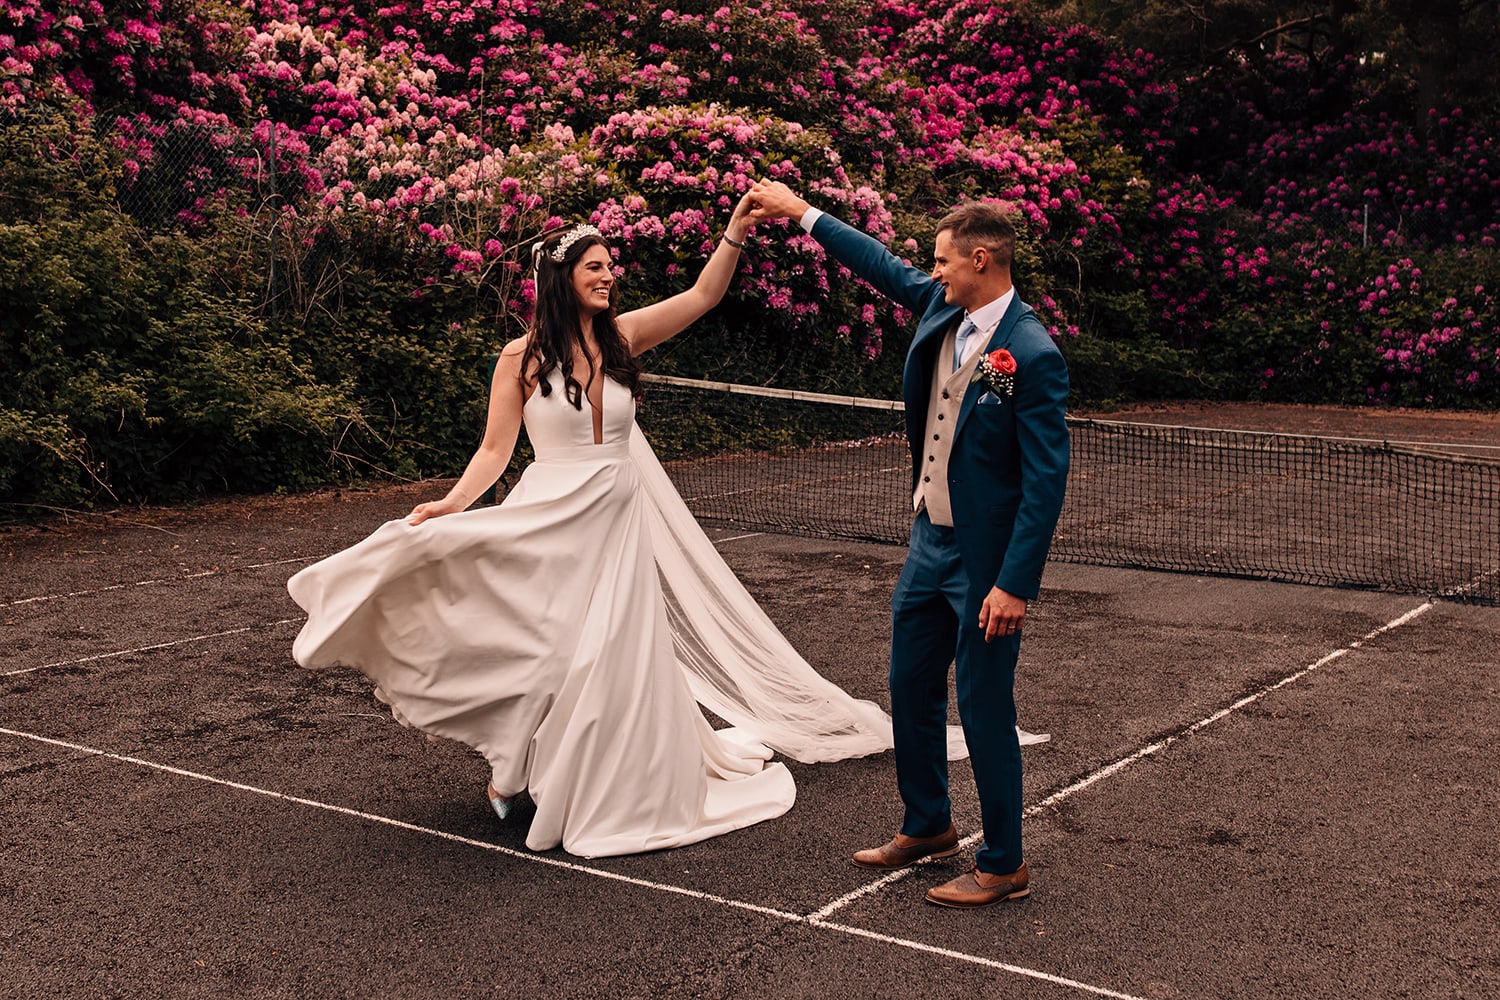 Bride and groom dancing on an abandoned tennis court infront of a large rhododendron bush